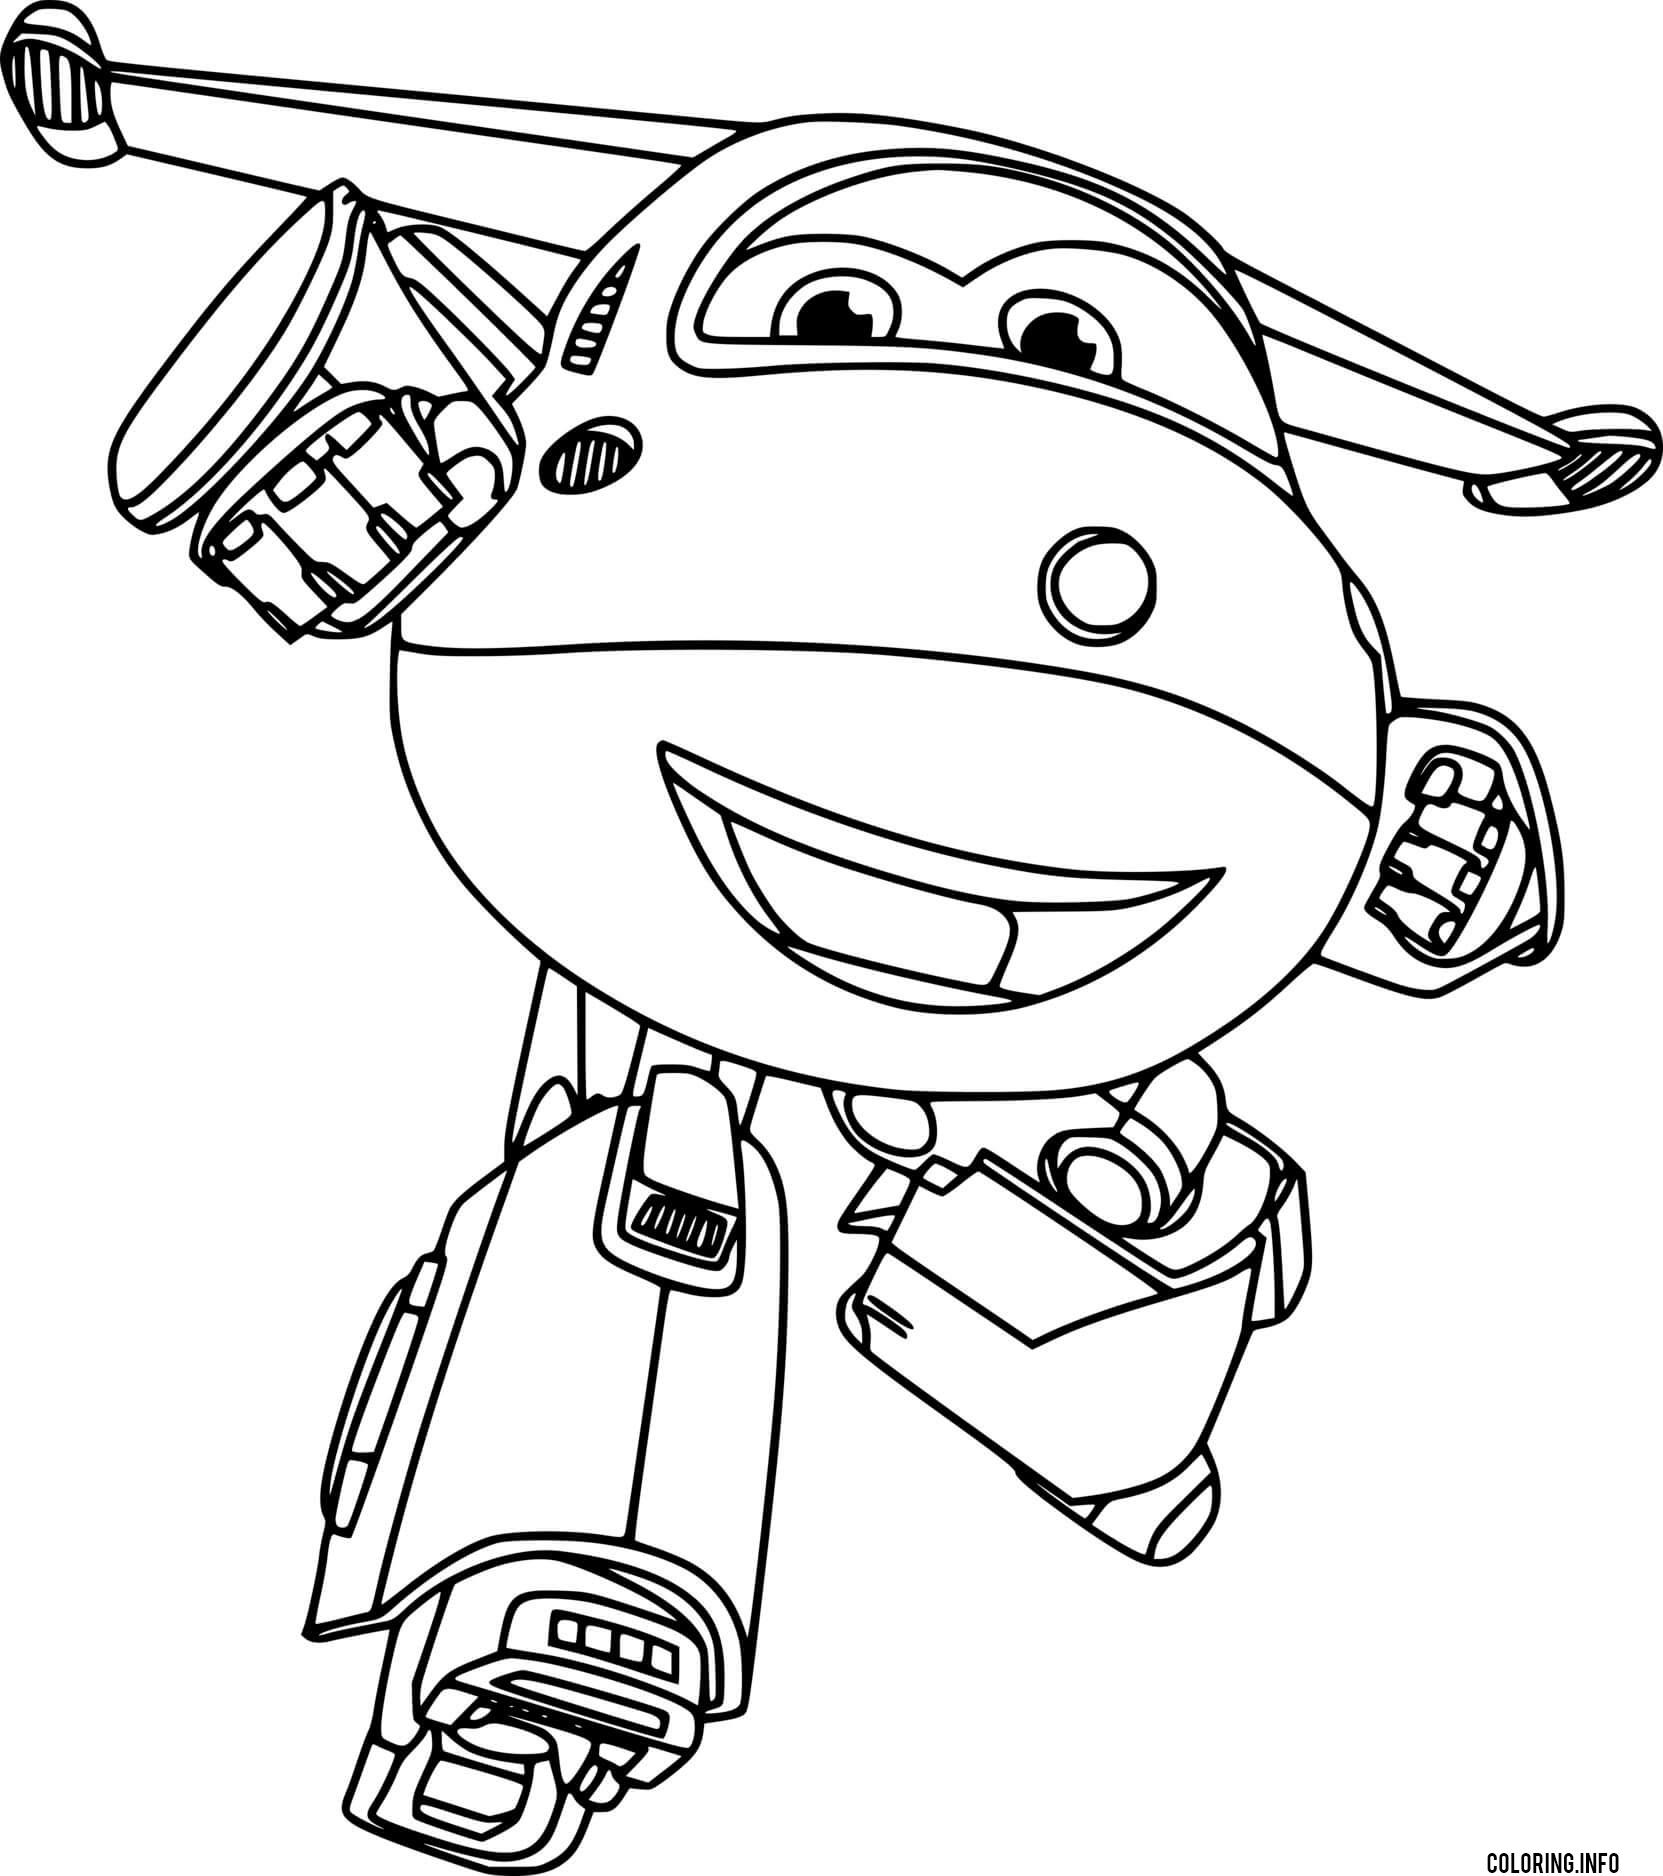 Super Wings Jett Is Ready coloring